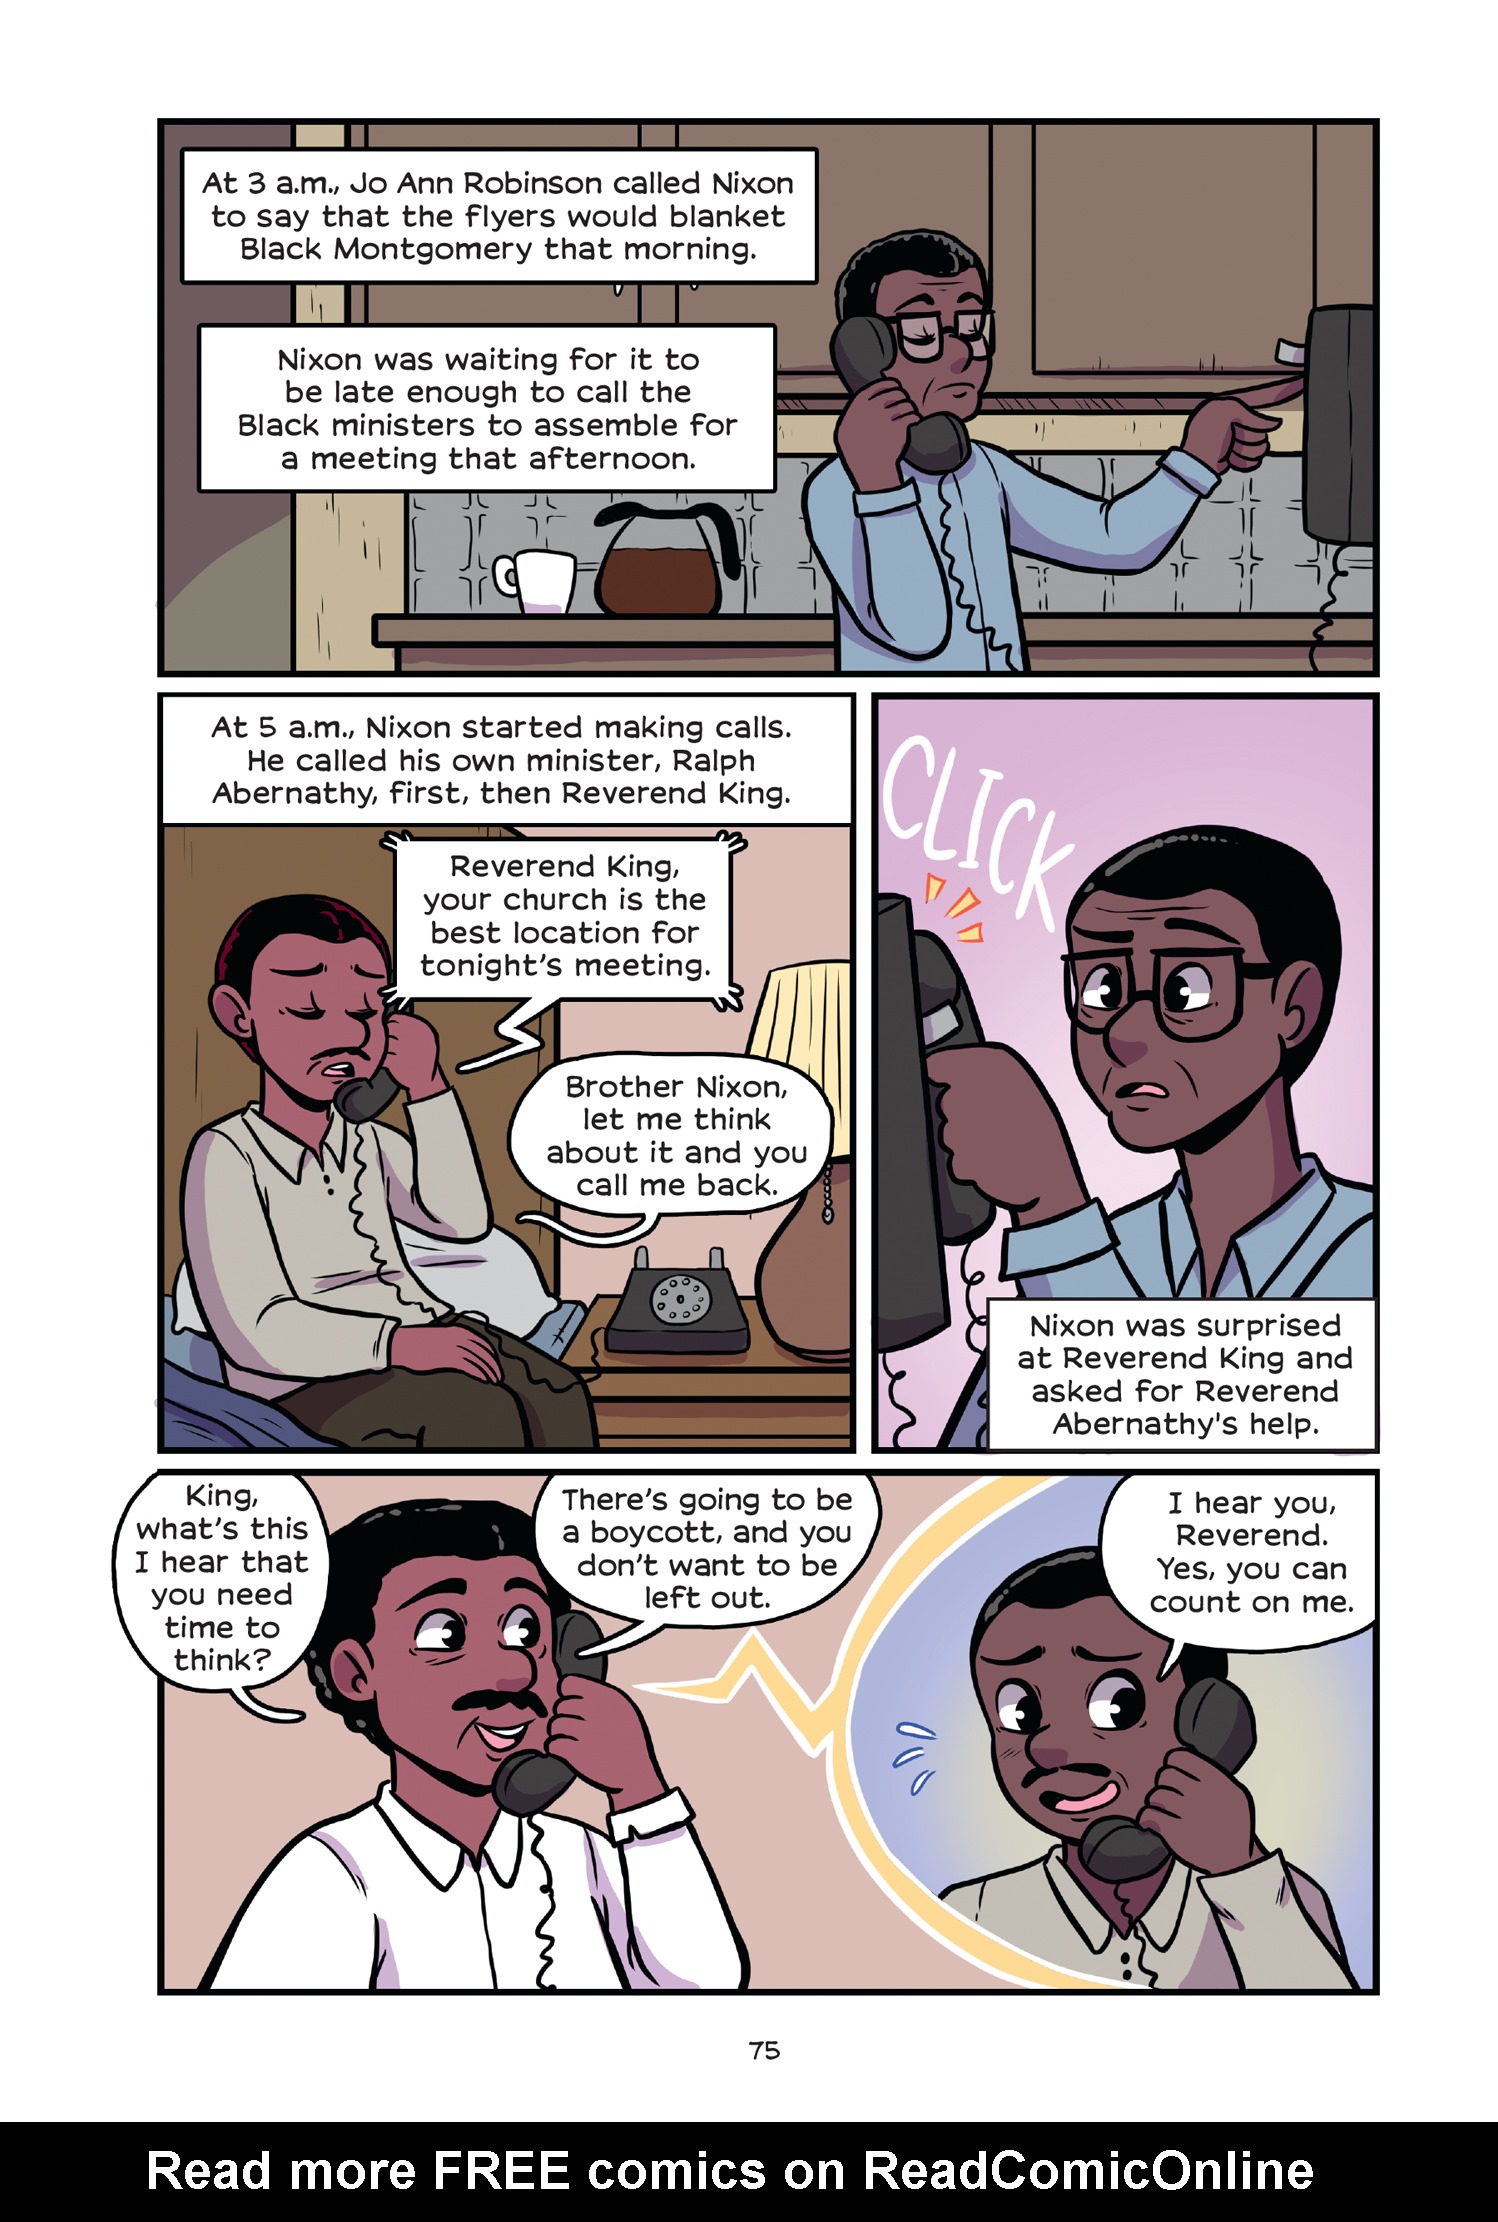 Read online History Comics comic -  Issue # Rosa Parks & Claudette Colvin - Civil Rights Heroes - 80